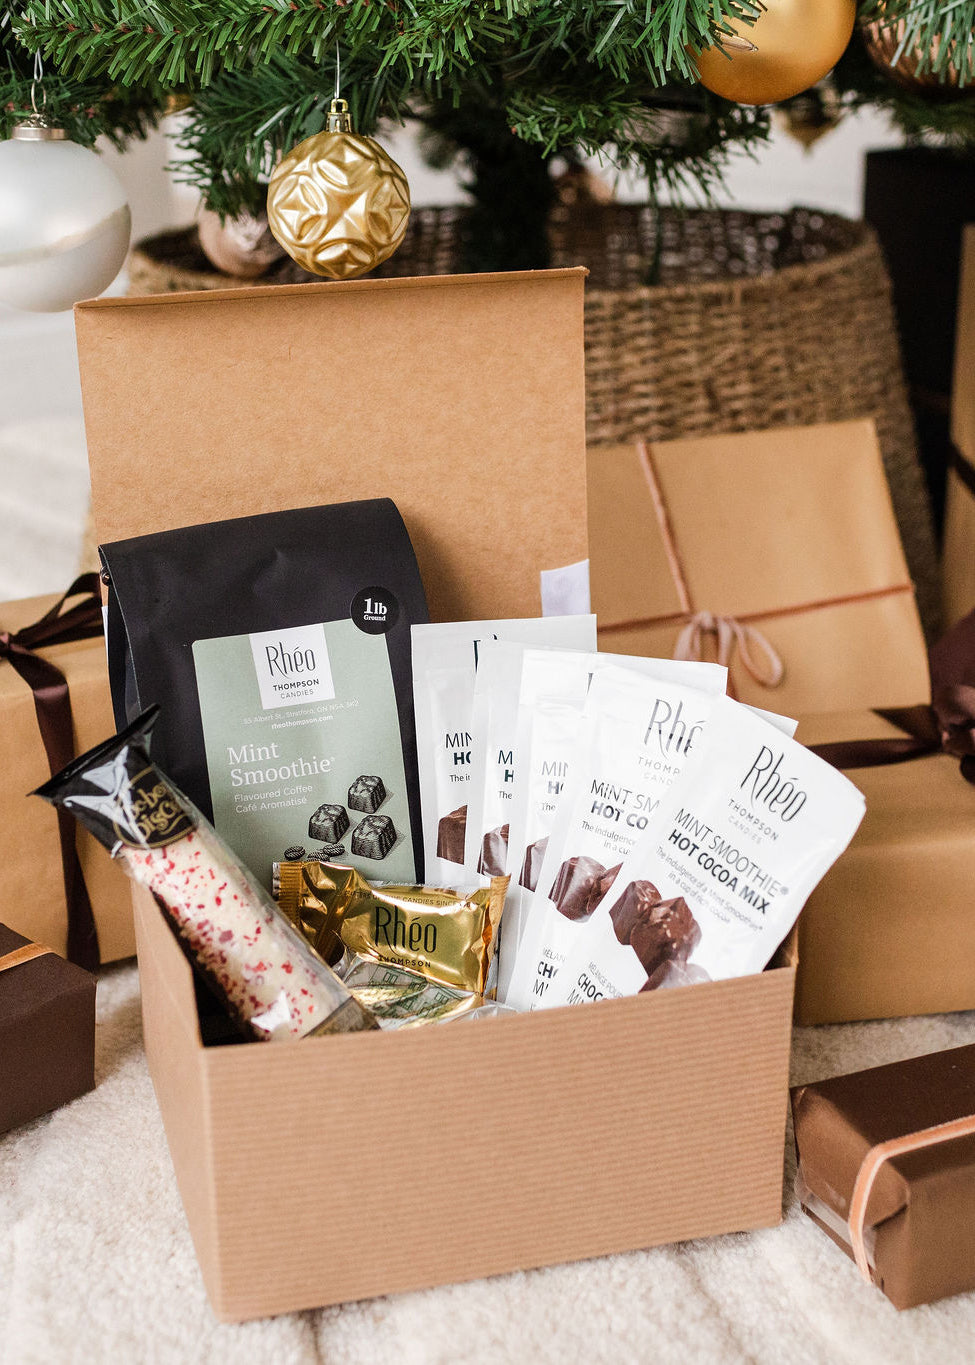 Mint Smoothie Gift Box